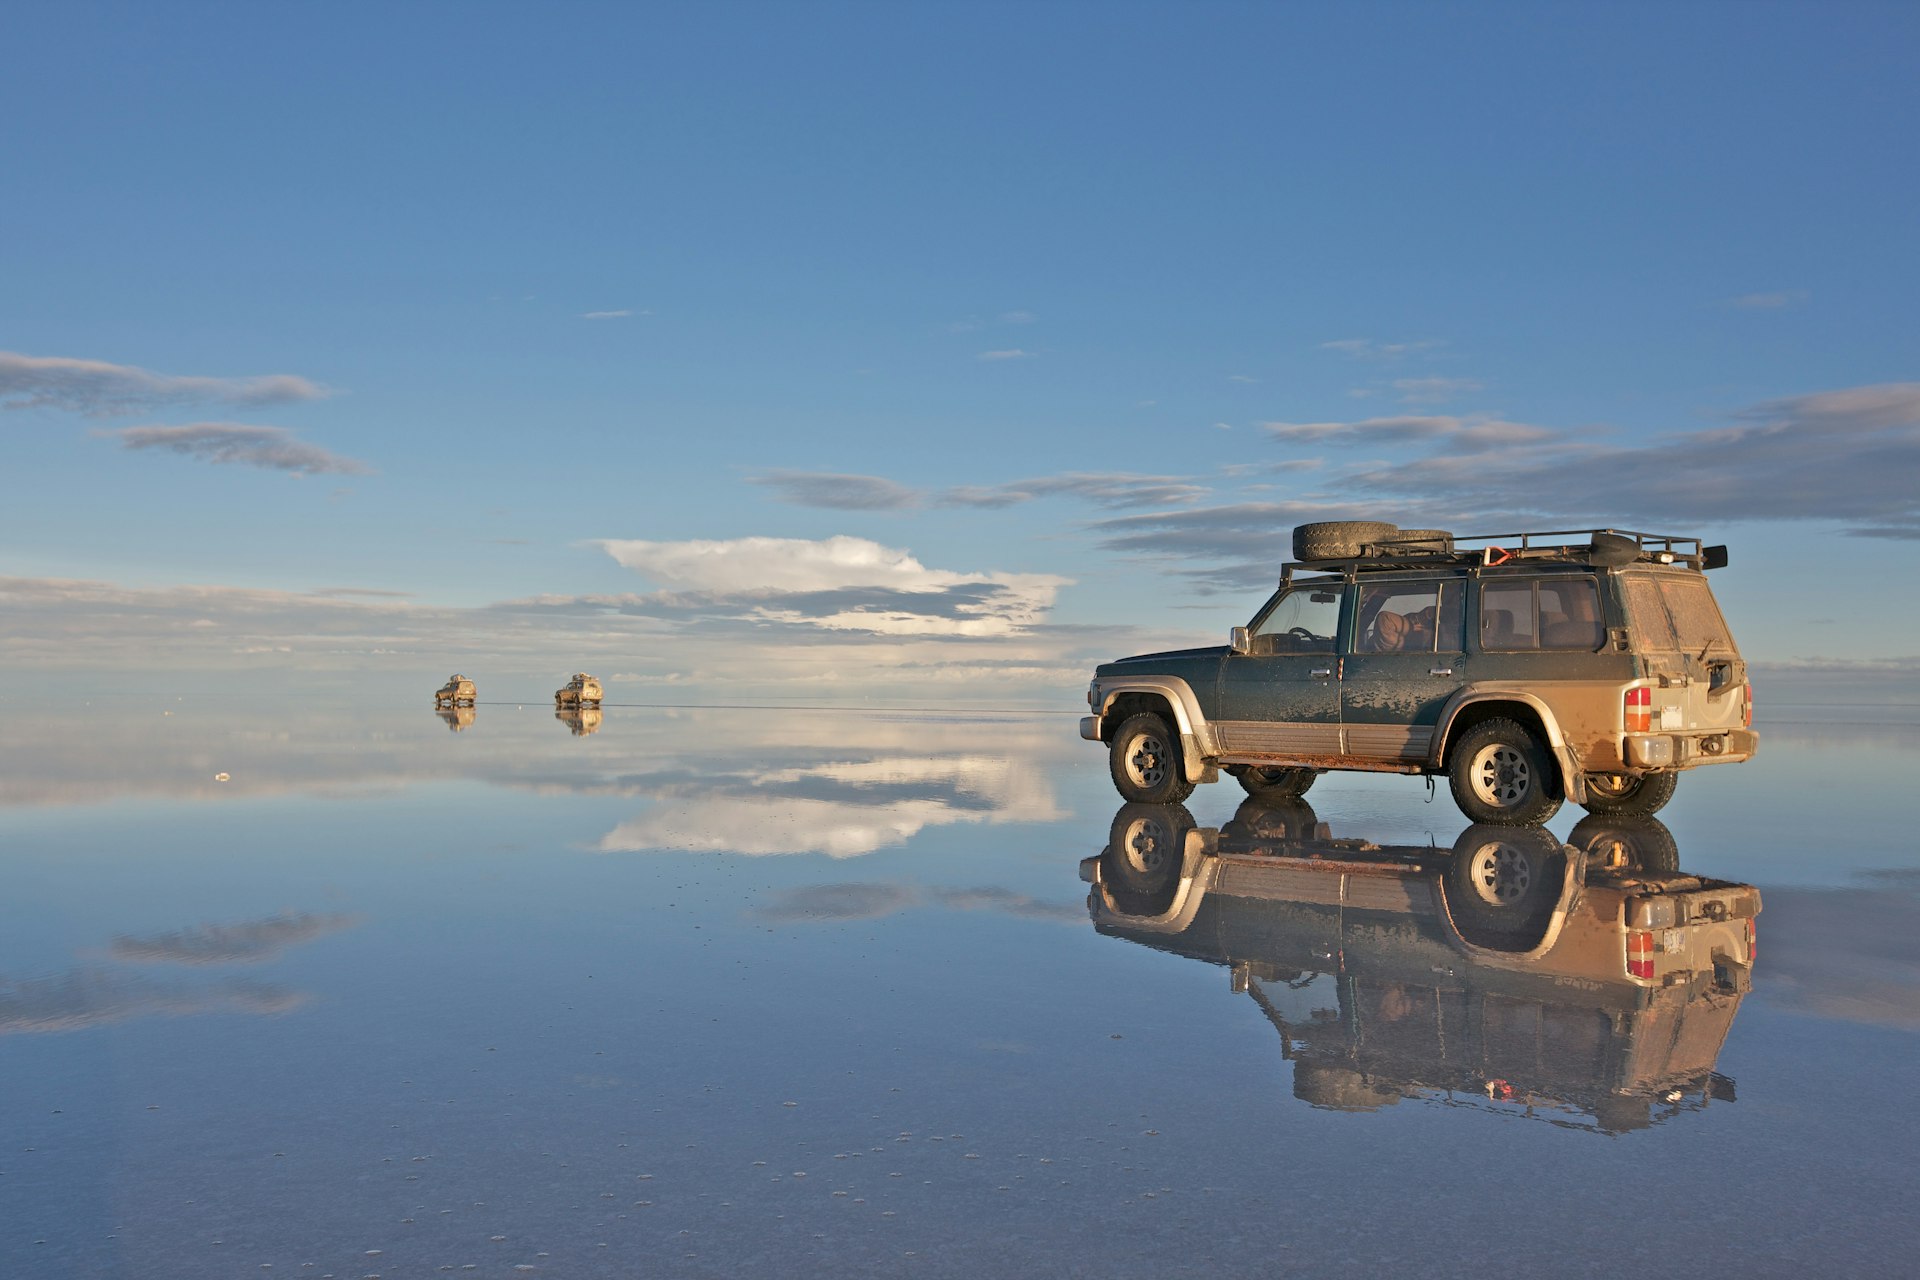 A 4WD stands in shallow water creating a near-perfect reflection. It is in an extensive flat area that seems to stretch endlessly